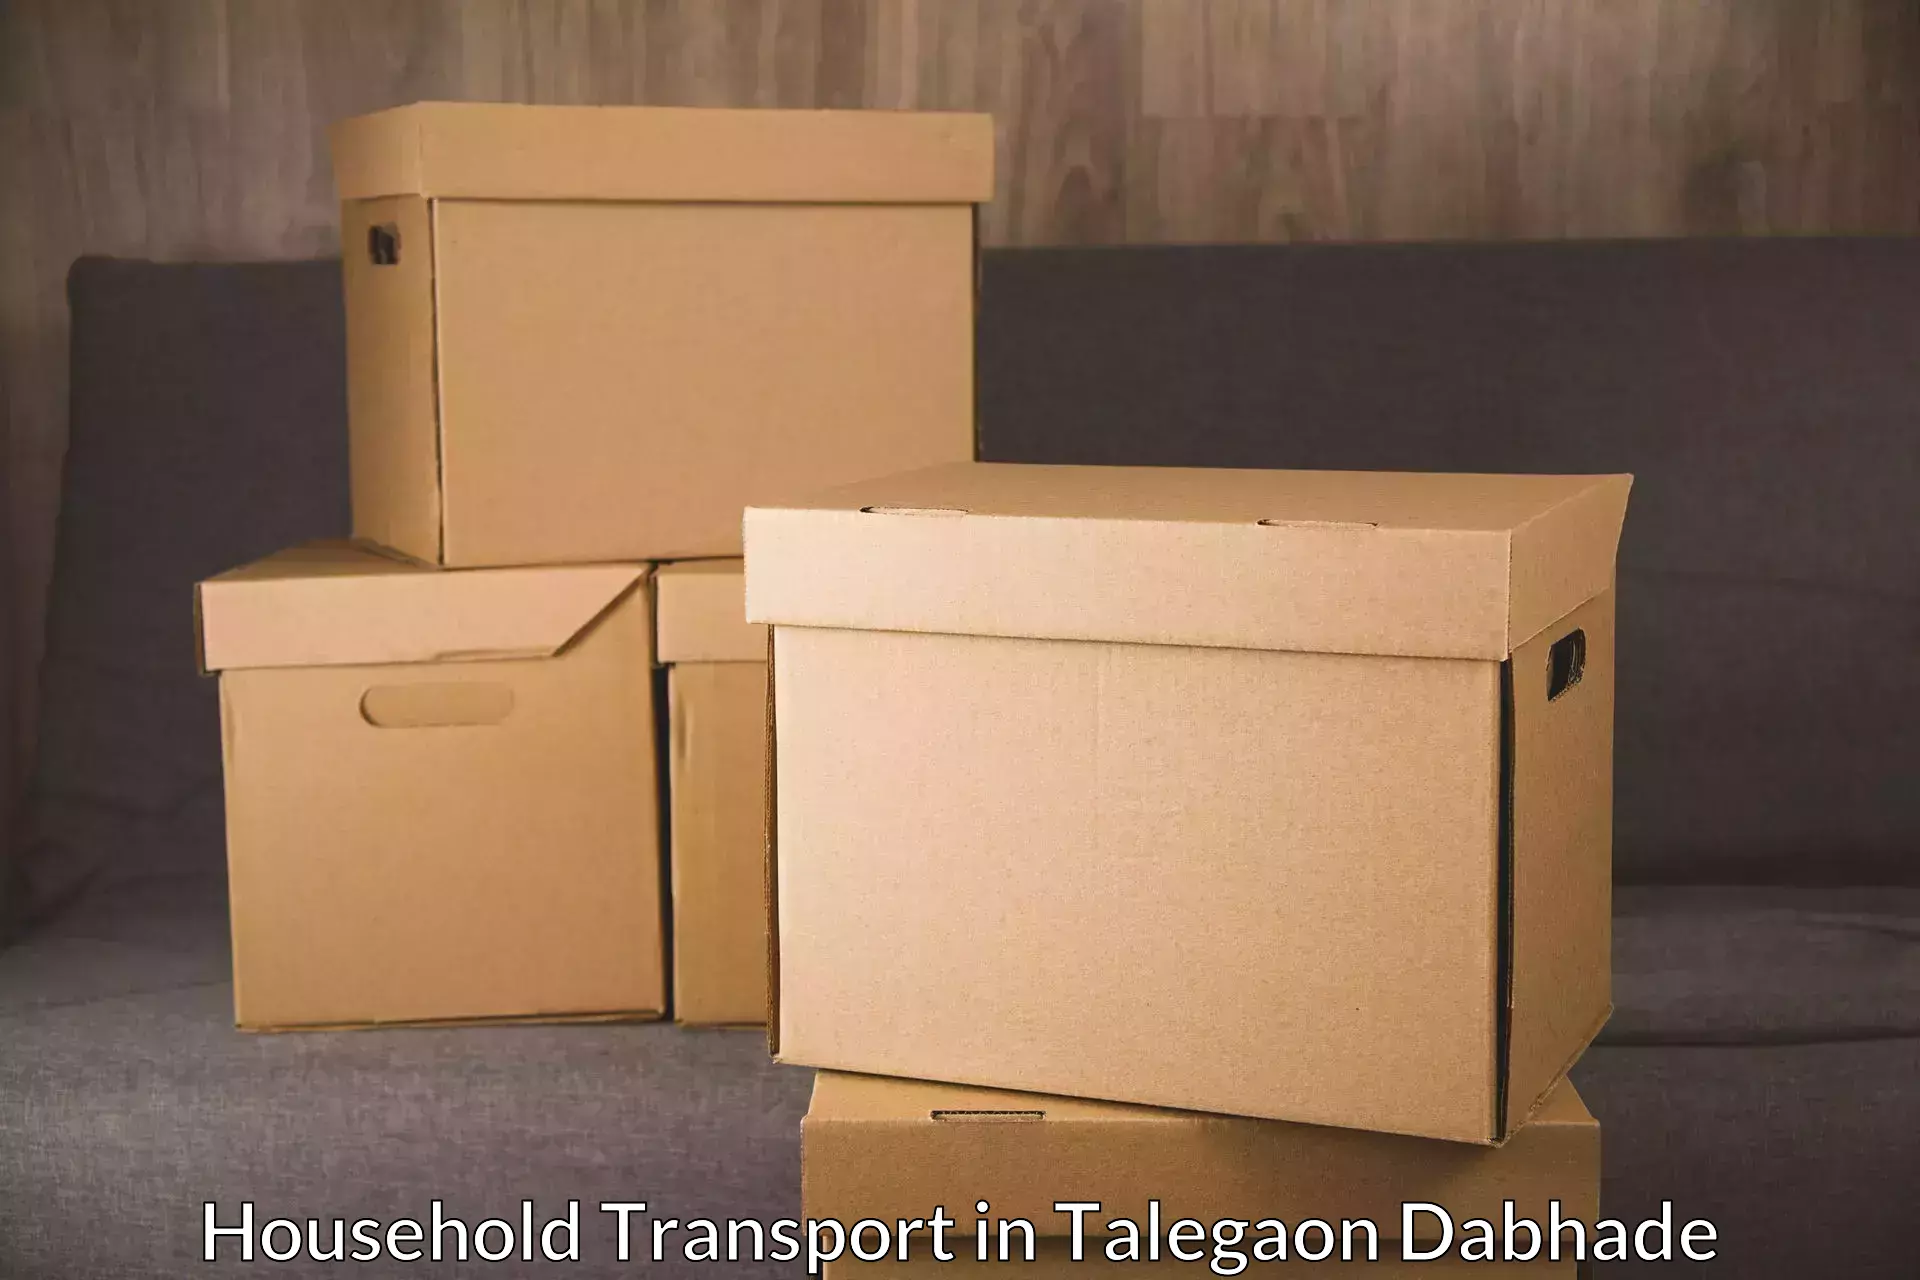 Household goods transport in Talegaon Dabhade